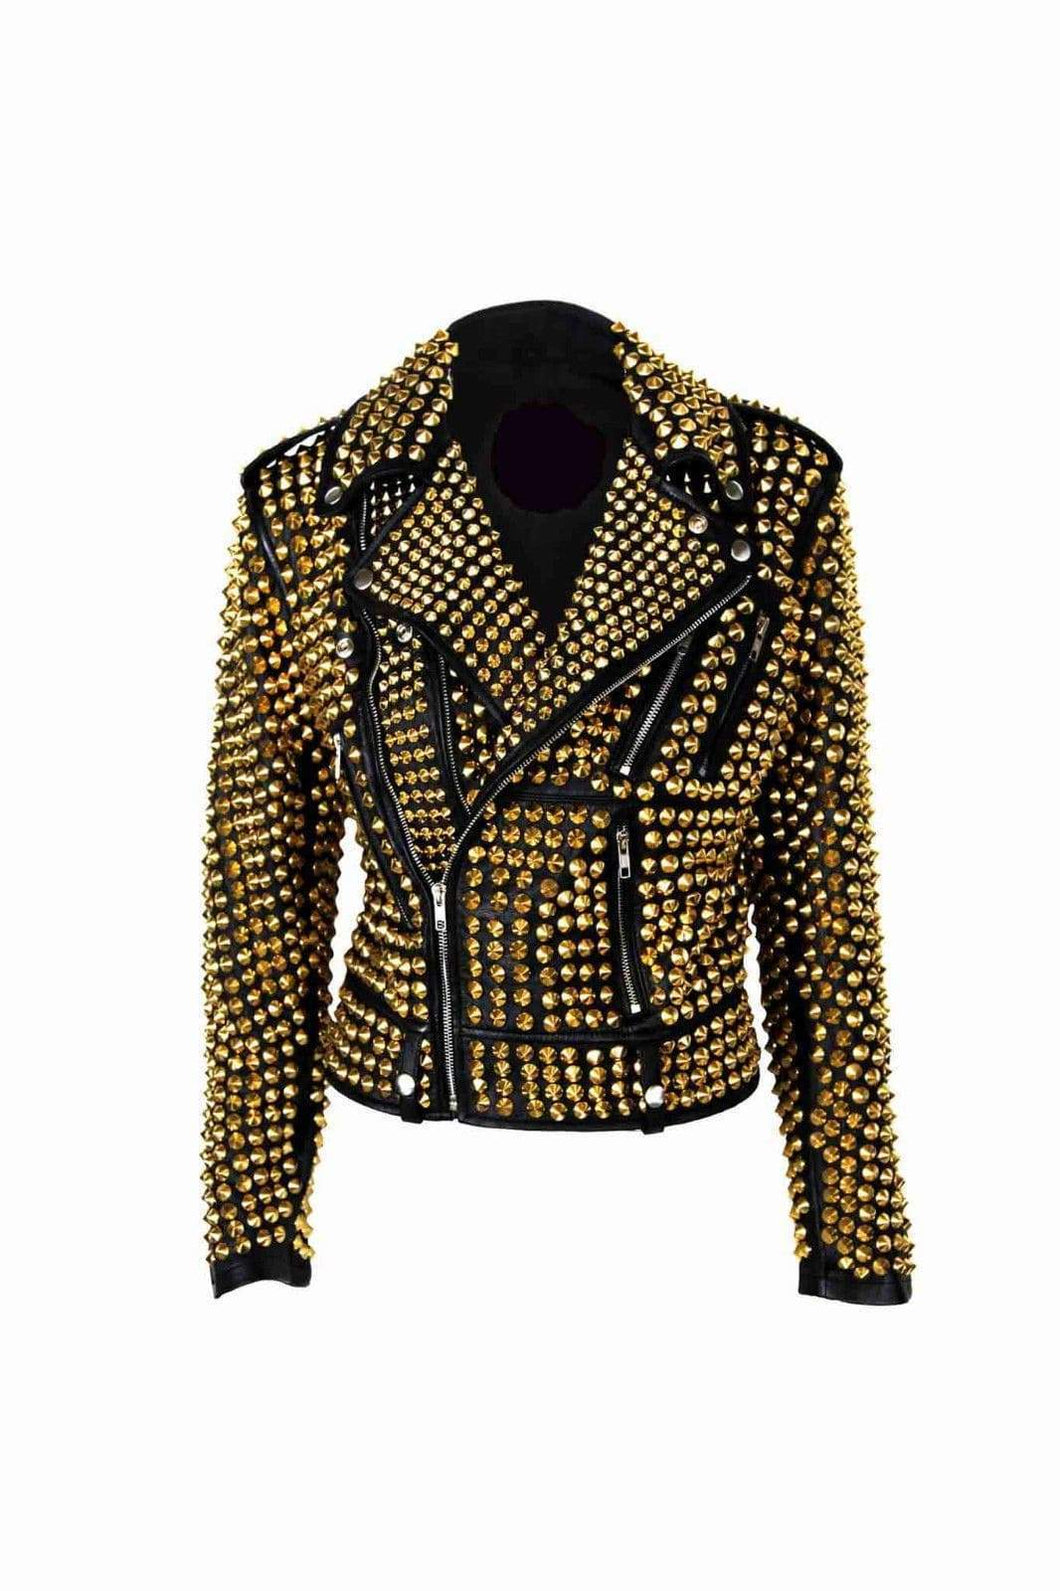 Luxury Woman Black Punk Golden Studded Cowhide Leather Jacket - Shearling leather